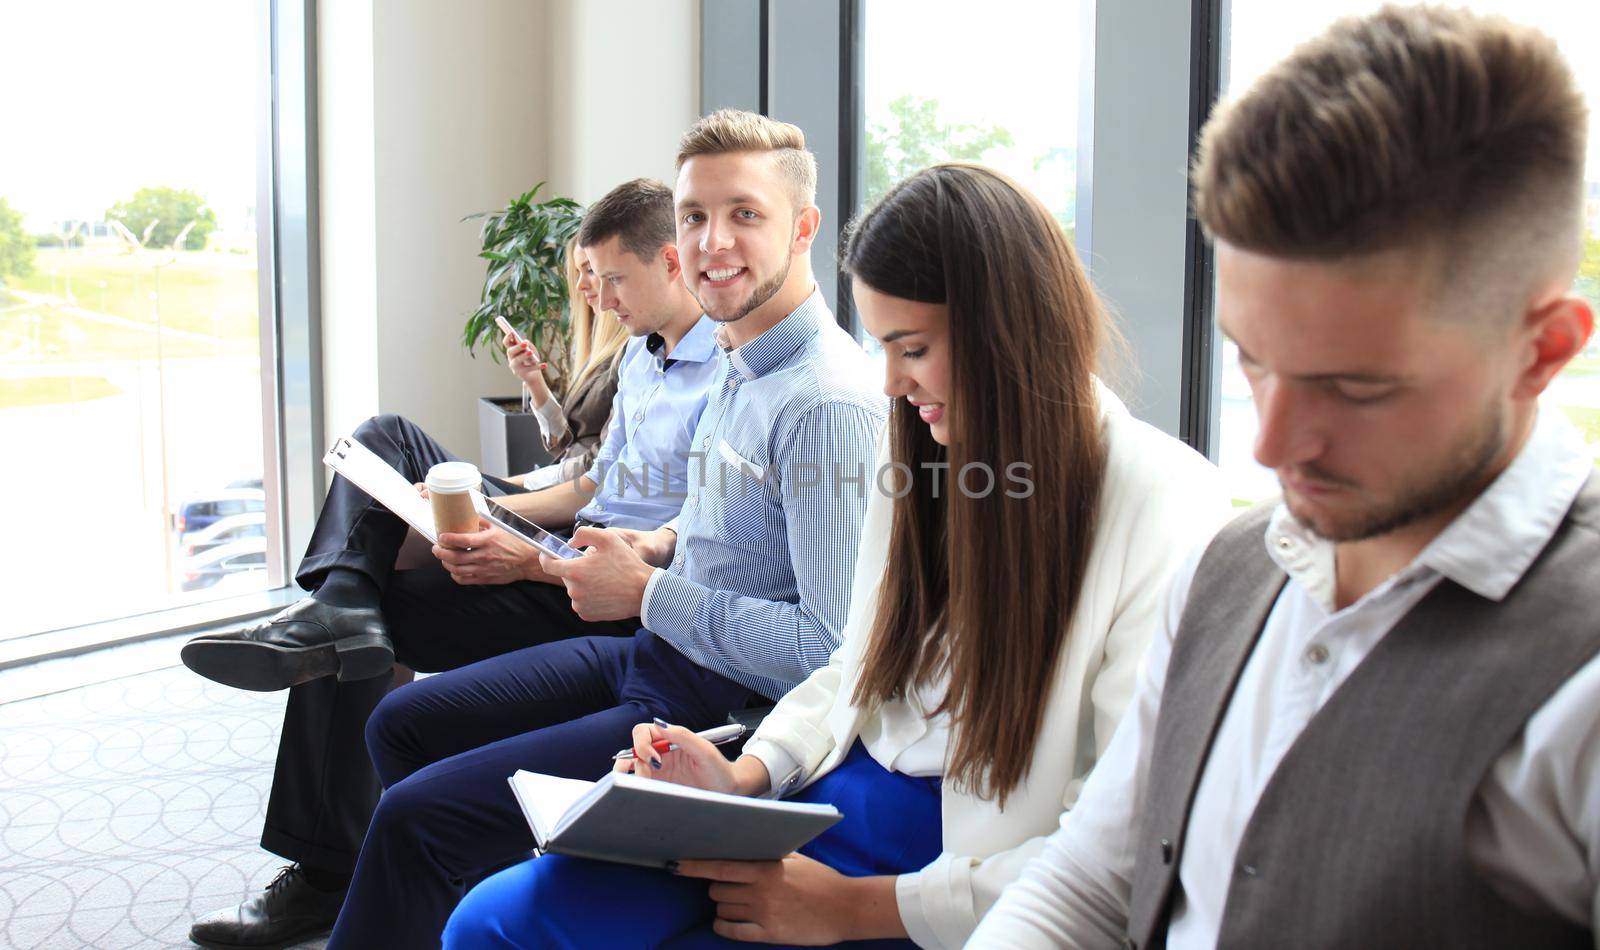 Smiling businessman looking at camera at seminar with her colleagues near by